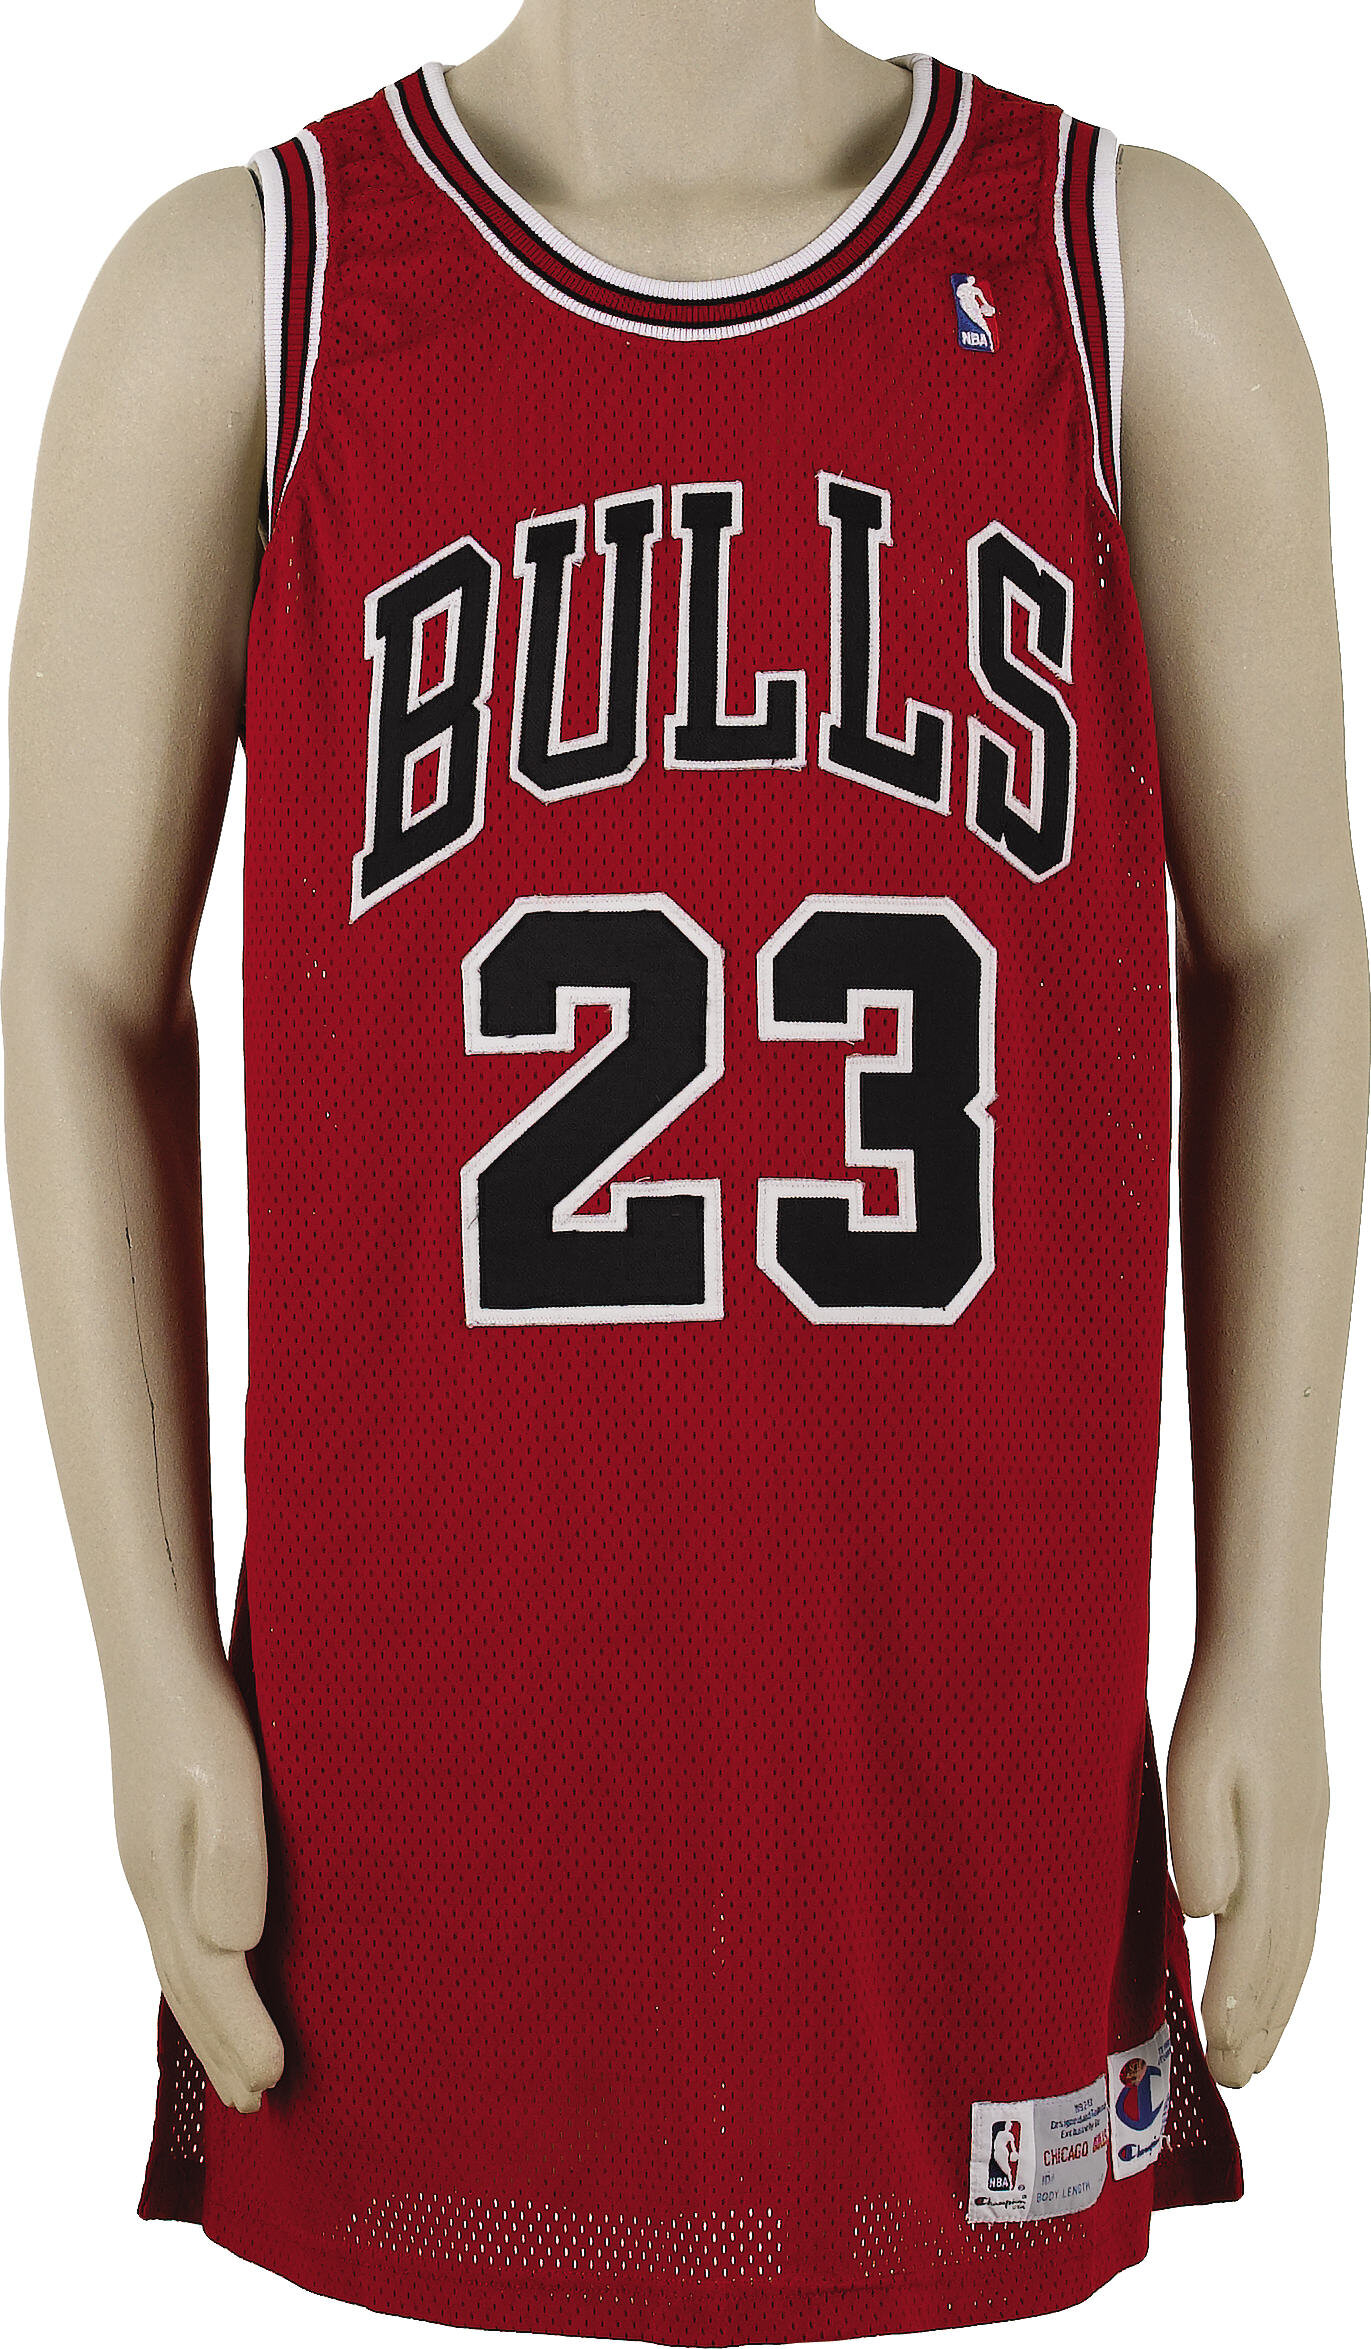 Michael Jordan Game-Worn Jersey For Sale, Expected To Sell For Quarter-Mil!!